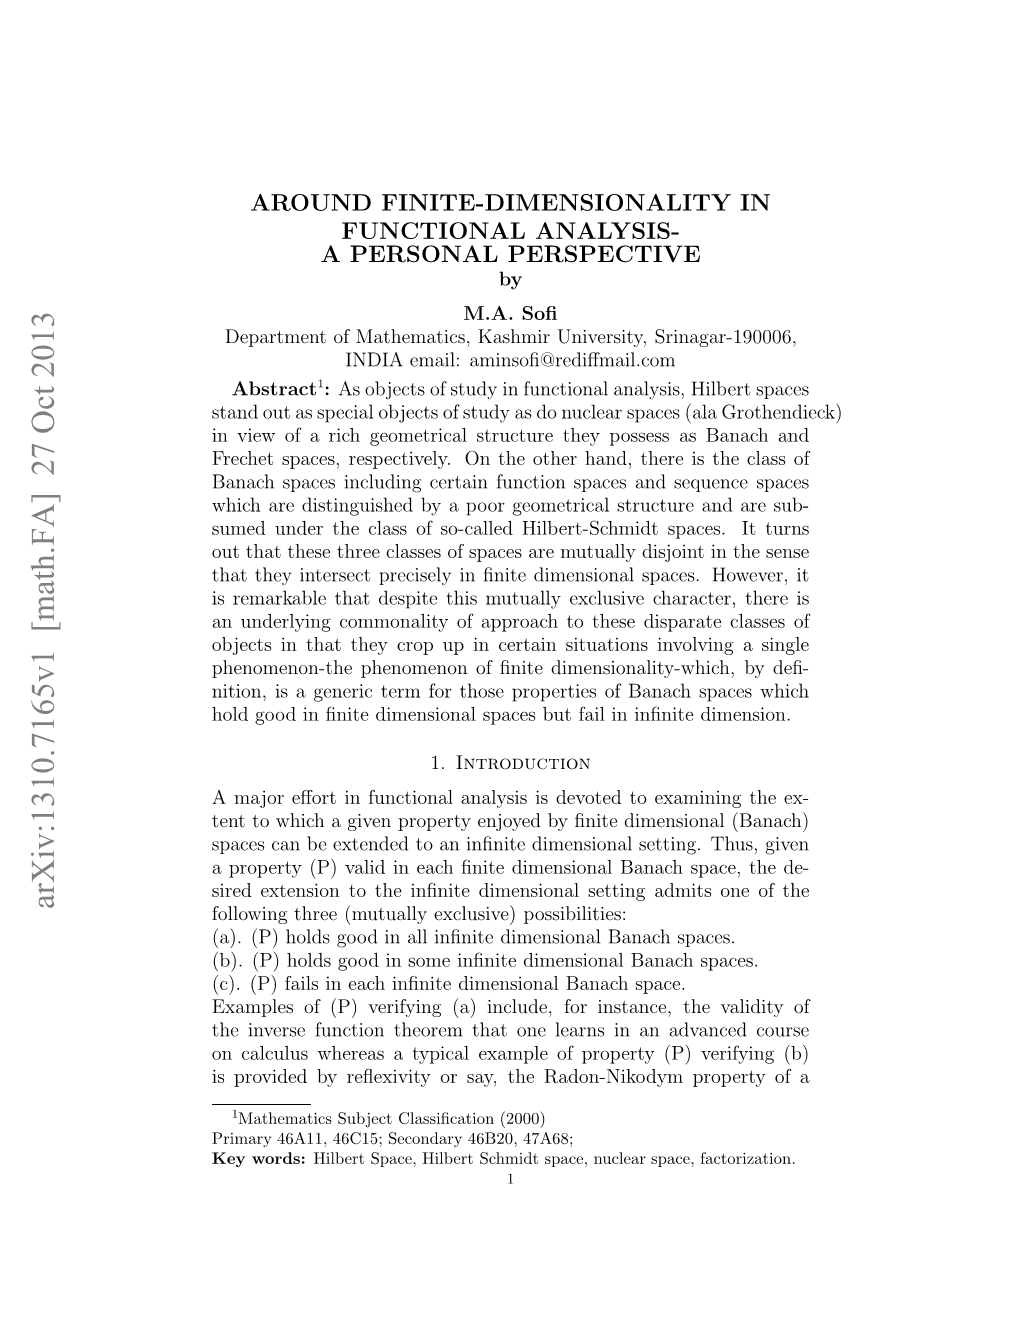 Around Finite-Dimensionality in Functional Analysis